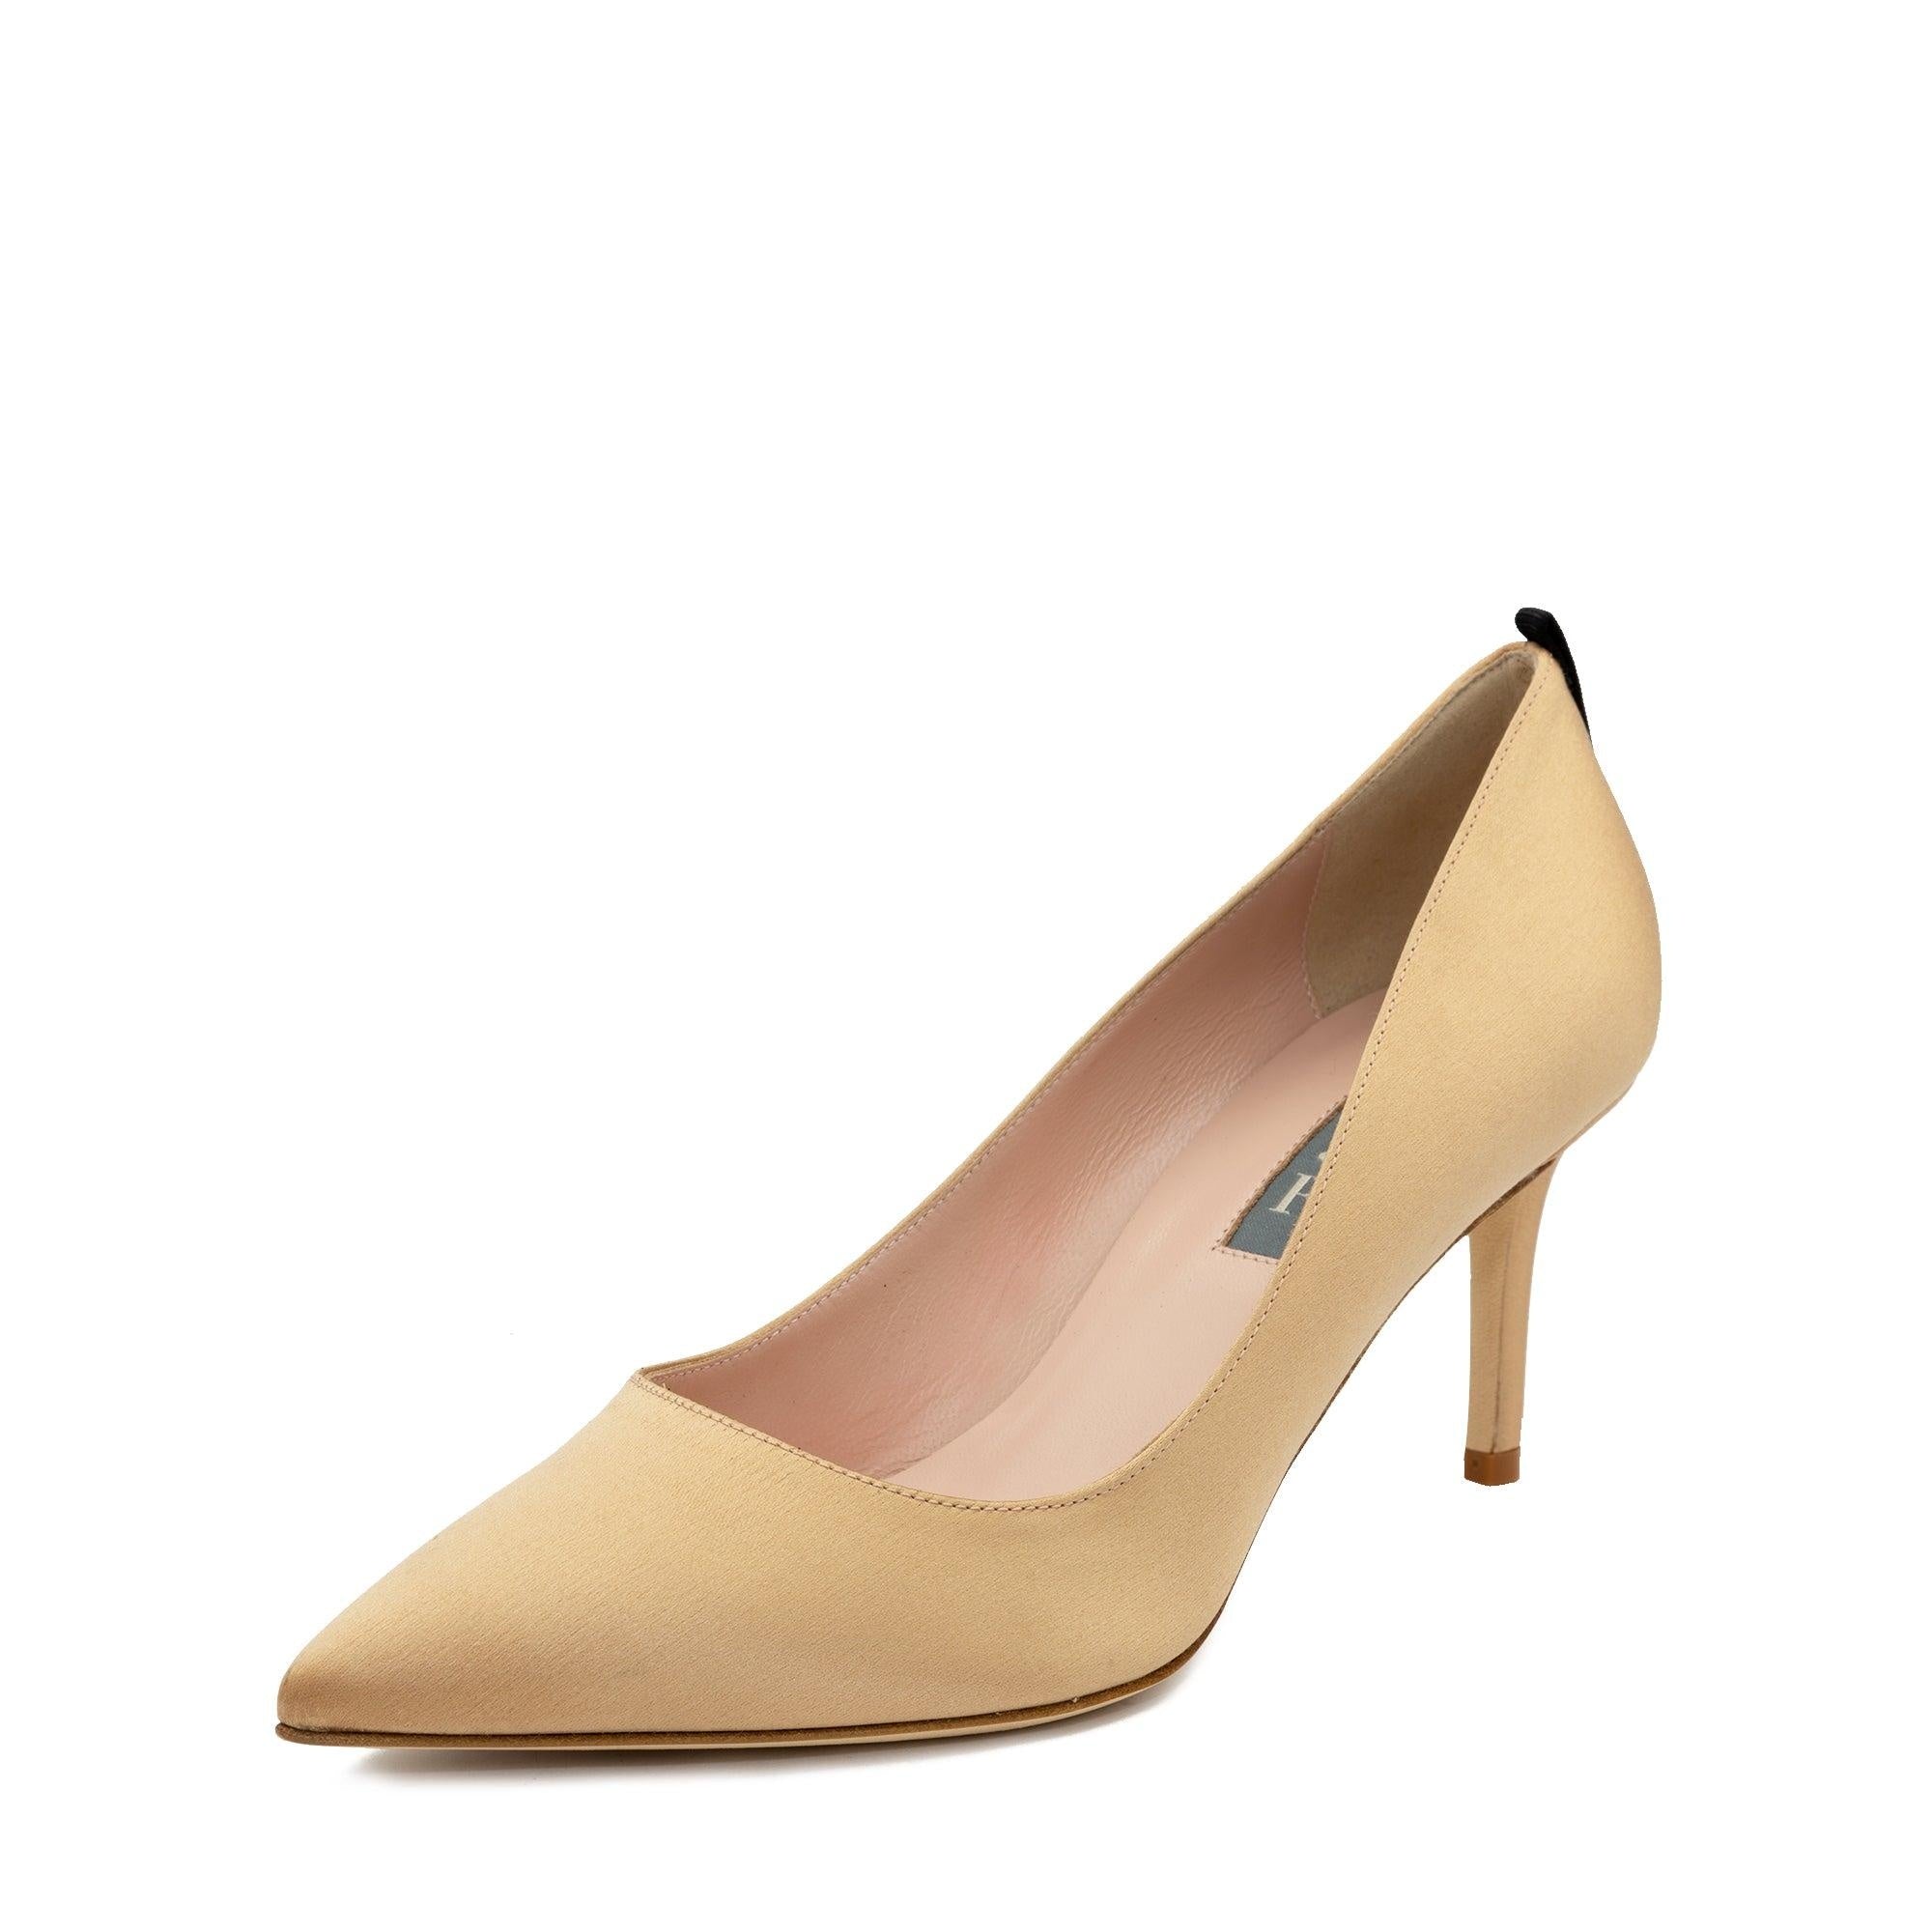 Buy SJP by Sarah Jessica Parker Fawn Nude Satin Pumps 70mm Online